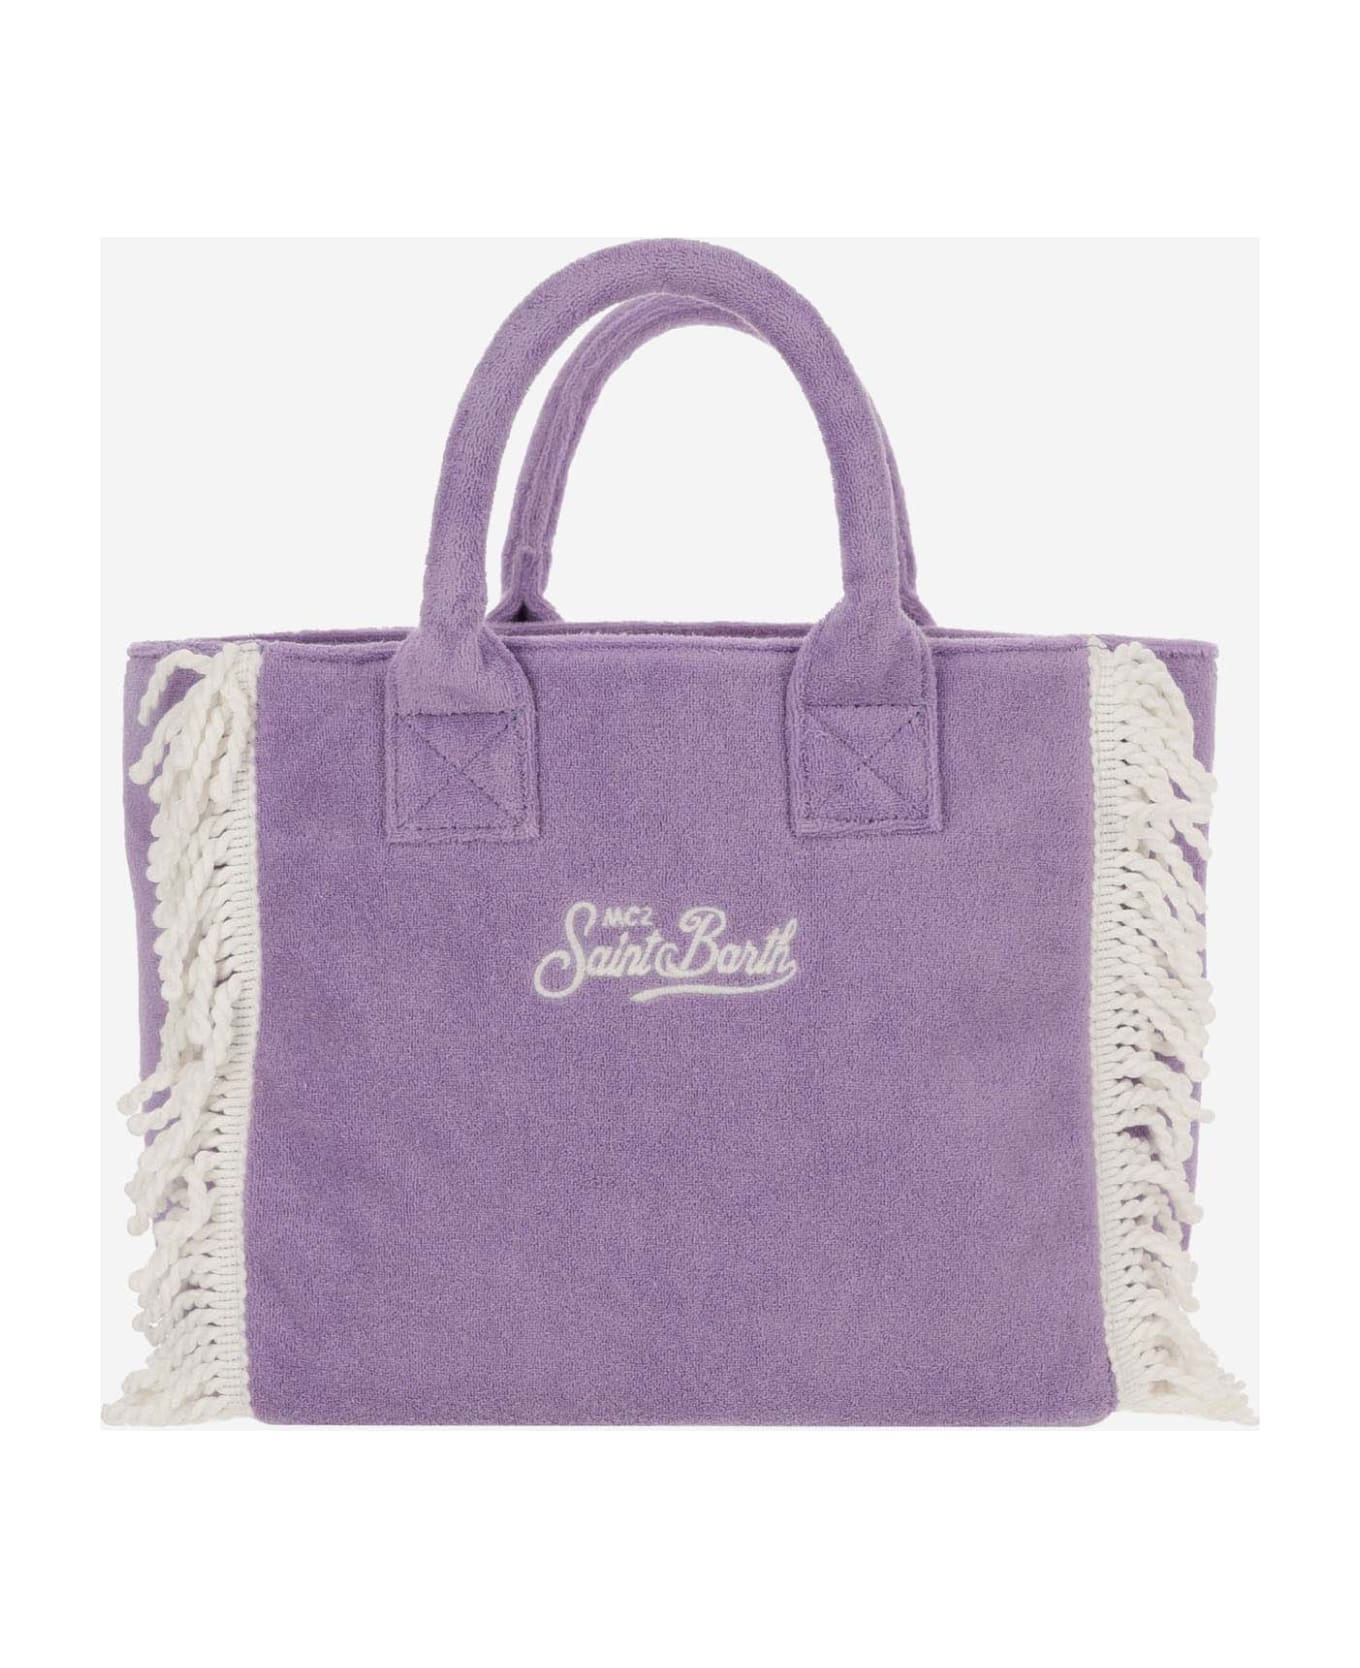 MC2 Saint Barth Colette Terry Tote Bag With Embroidery - Purple トートバッグ